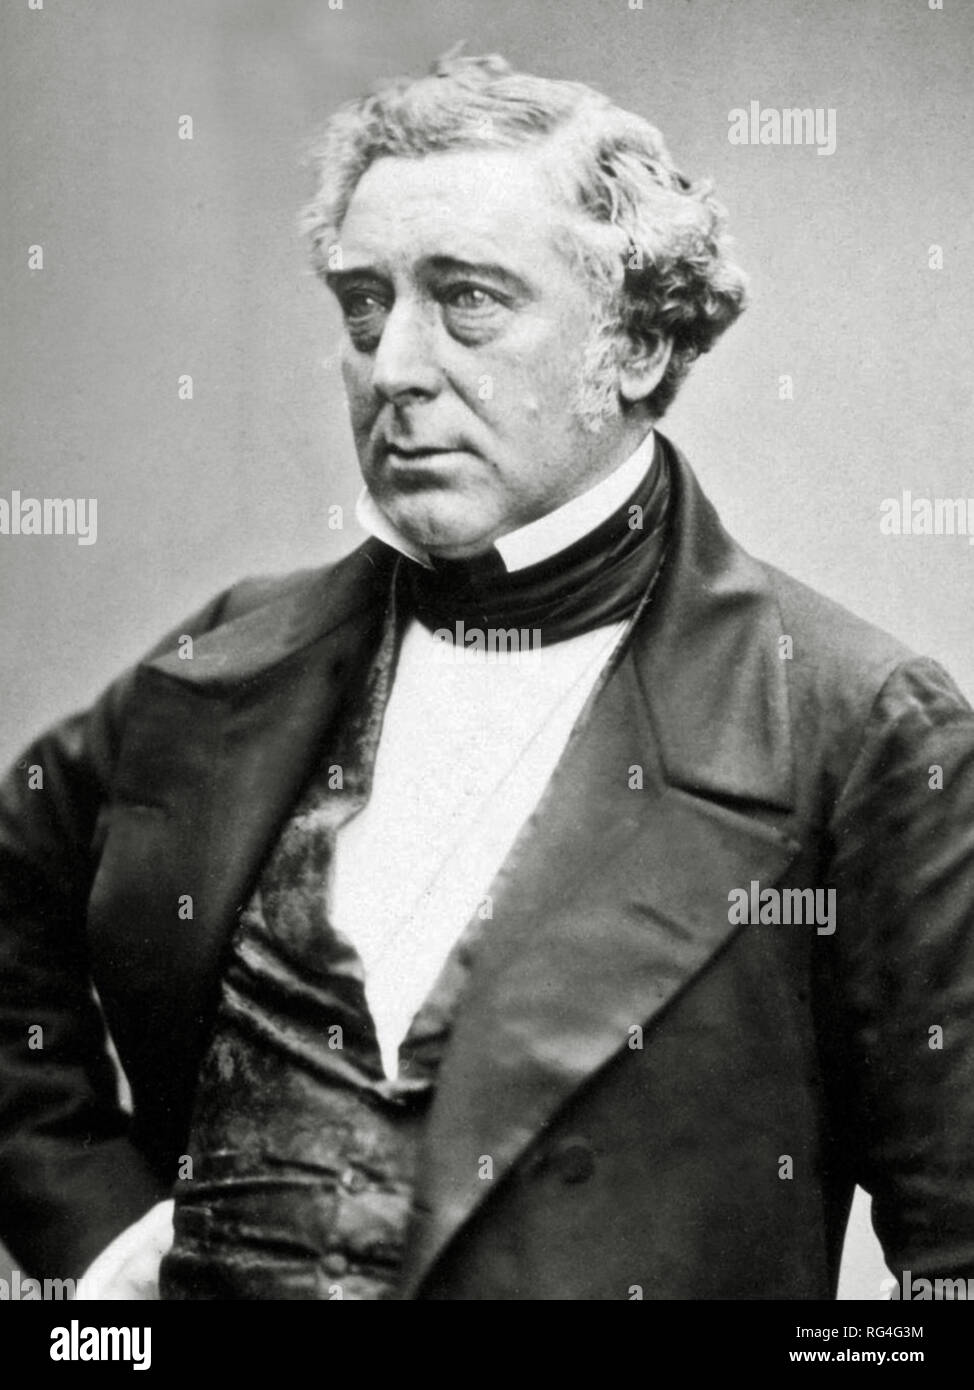 Robert Stephenson (16 October 1803 Ð 12 October 1859) was an early English railway and civil engineer. Scanned from image material in the archives of Press Portrait Service - (formerly Press Portrait Bureau). Stock Photo